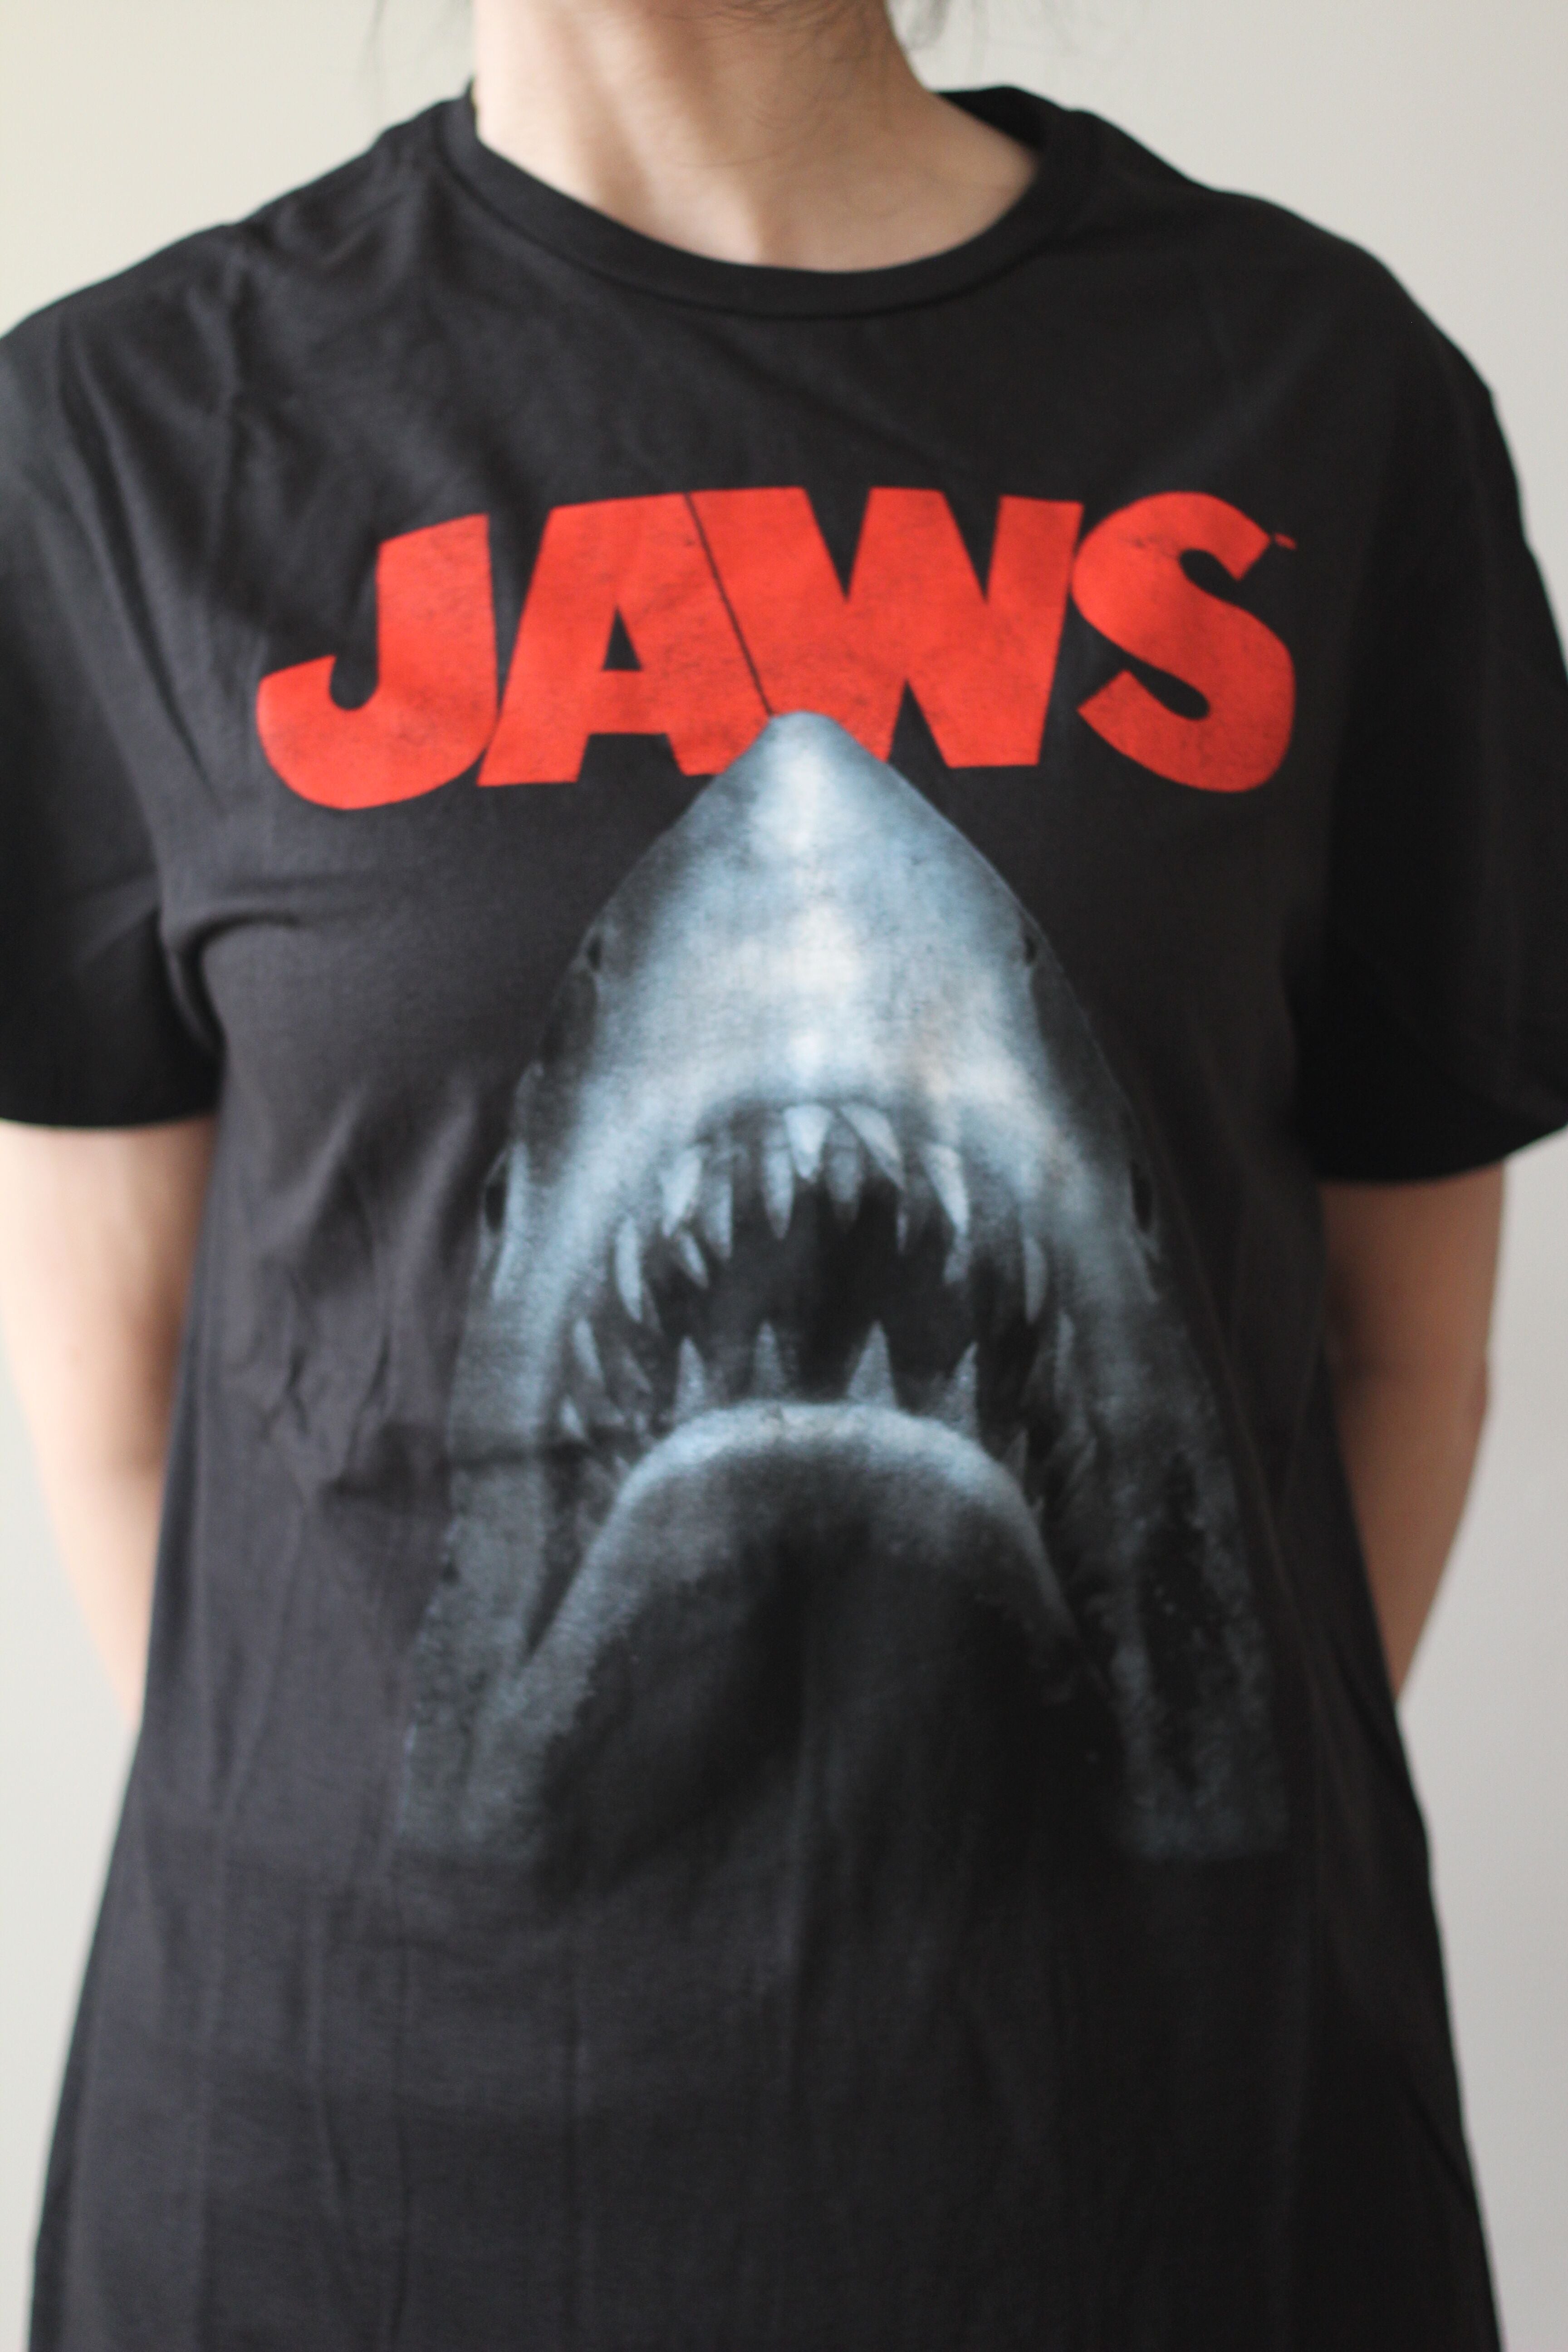 Jaws - Clothing Store